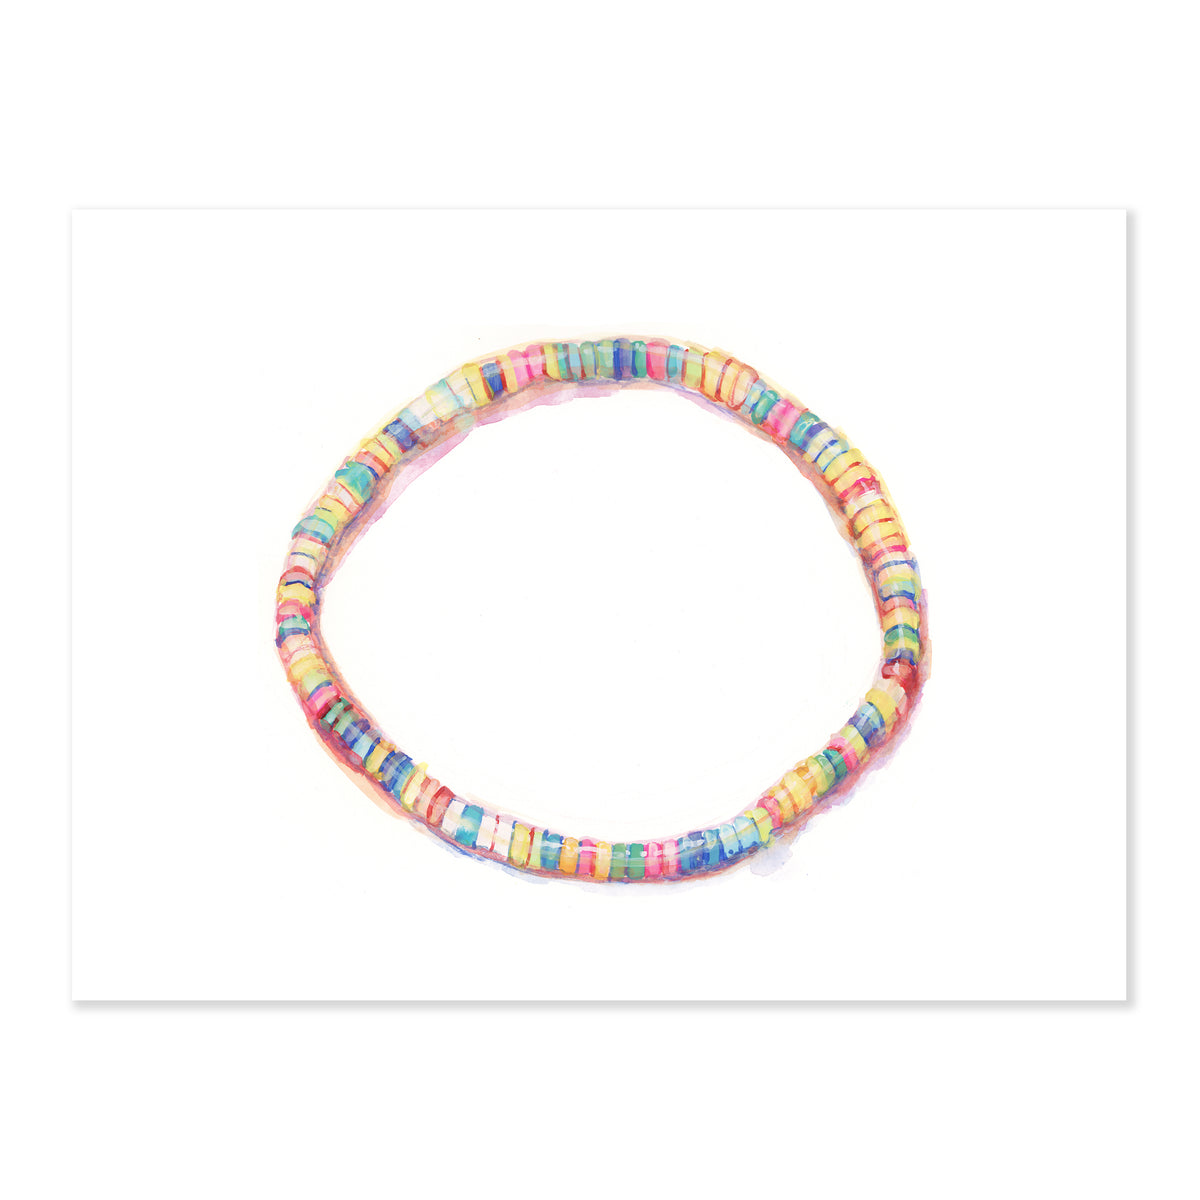 A fine art print illustrating a necklace made of sweet tarts candies of various colors painted with watercolors on a soft white background